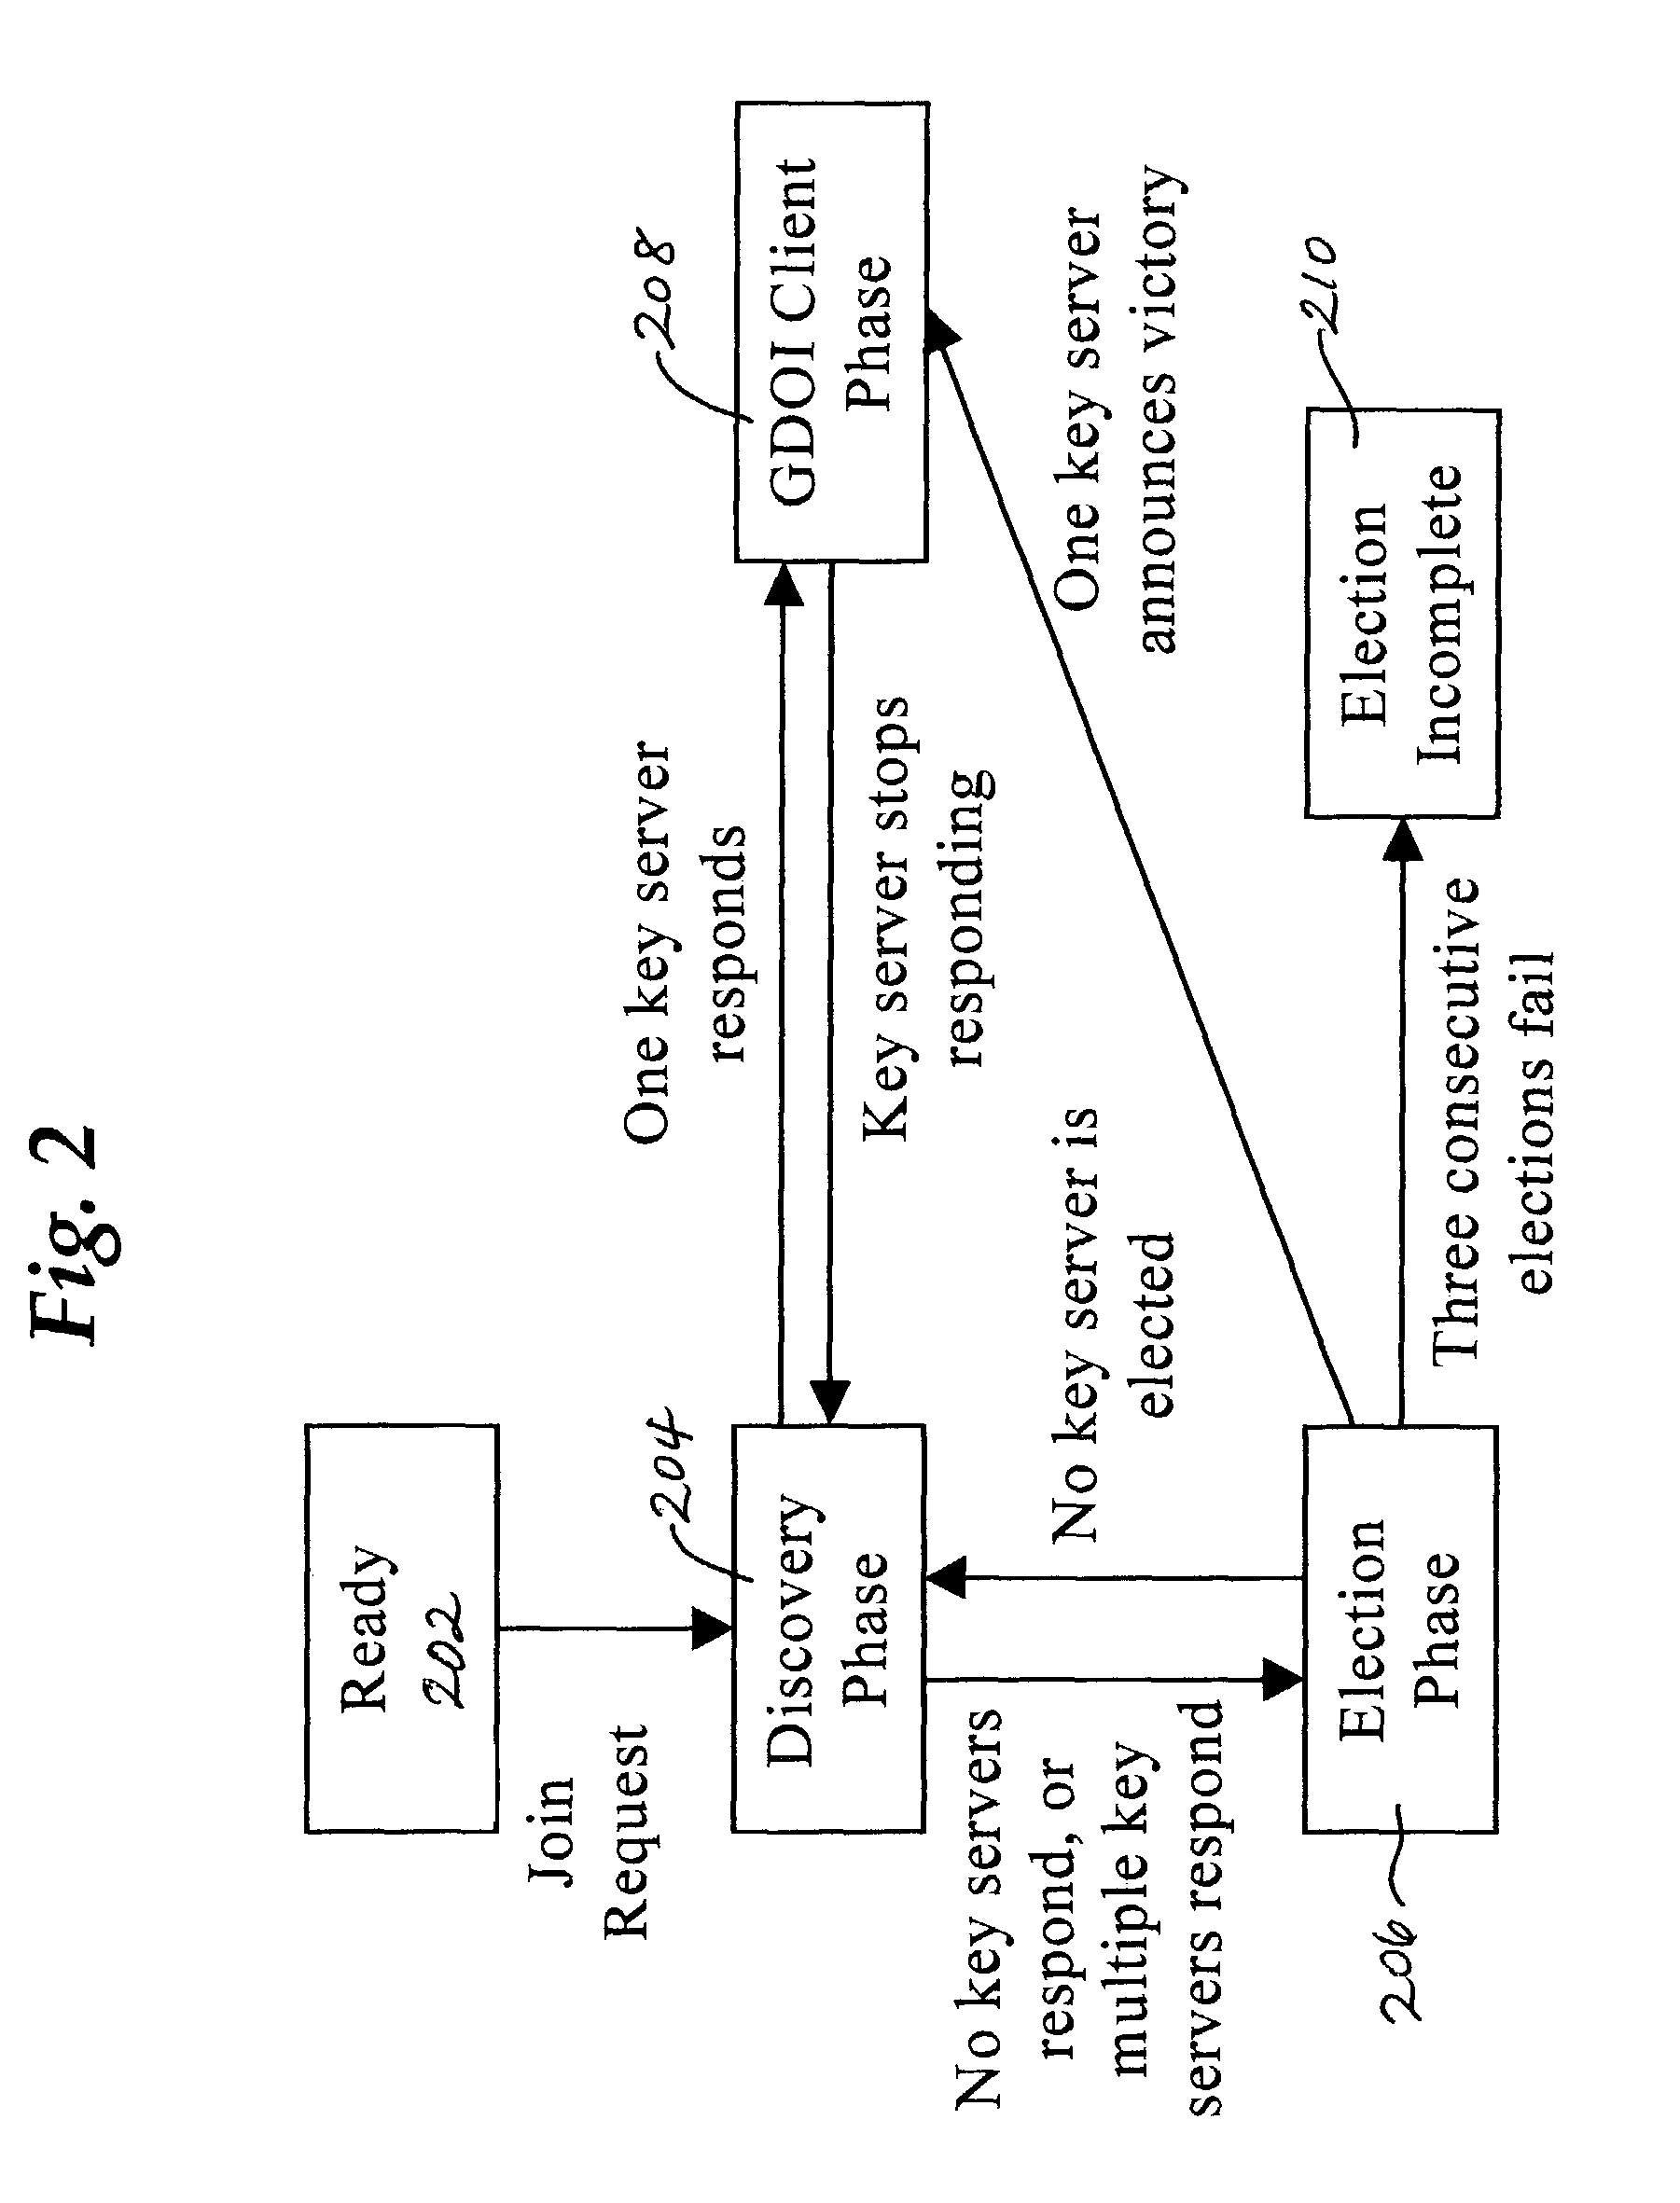 Method and apparatus for electing a leader node in a computer network